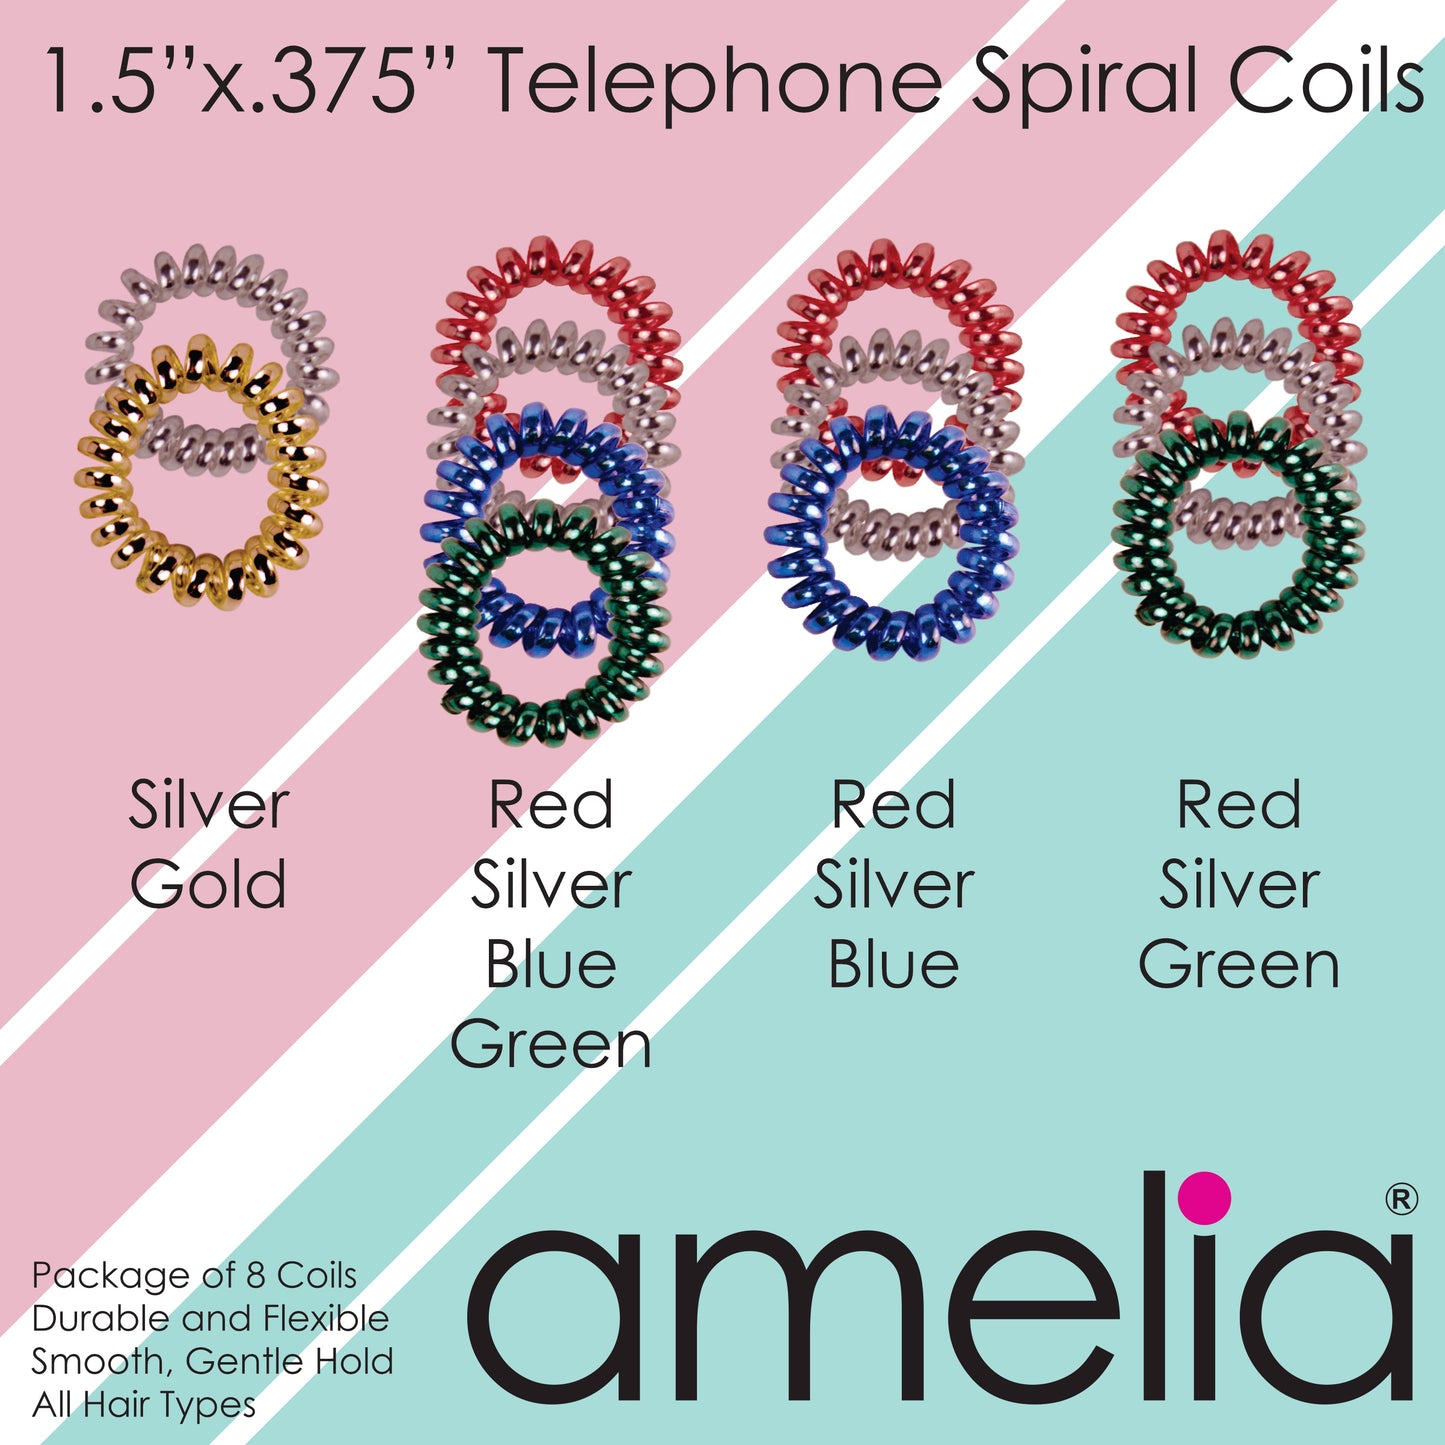 Amelia Beauty, 8 Small Shinny Elastic Hair Telephone Cord Coils, 1.5in Diameter Spiral Hair Ties, Strong Hold, Gentle on Hair, Sky Blue